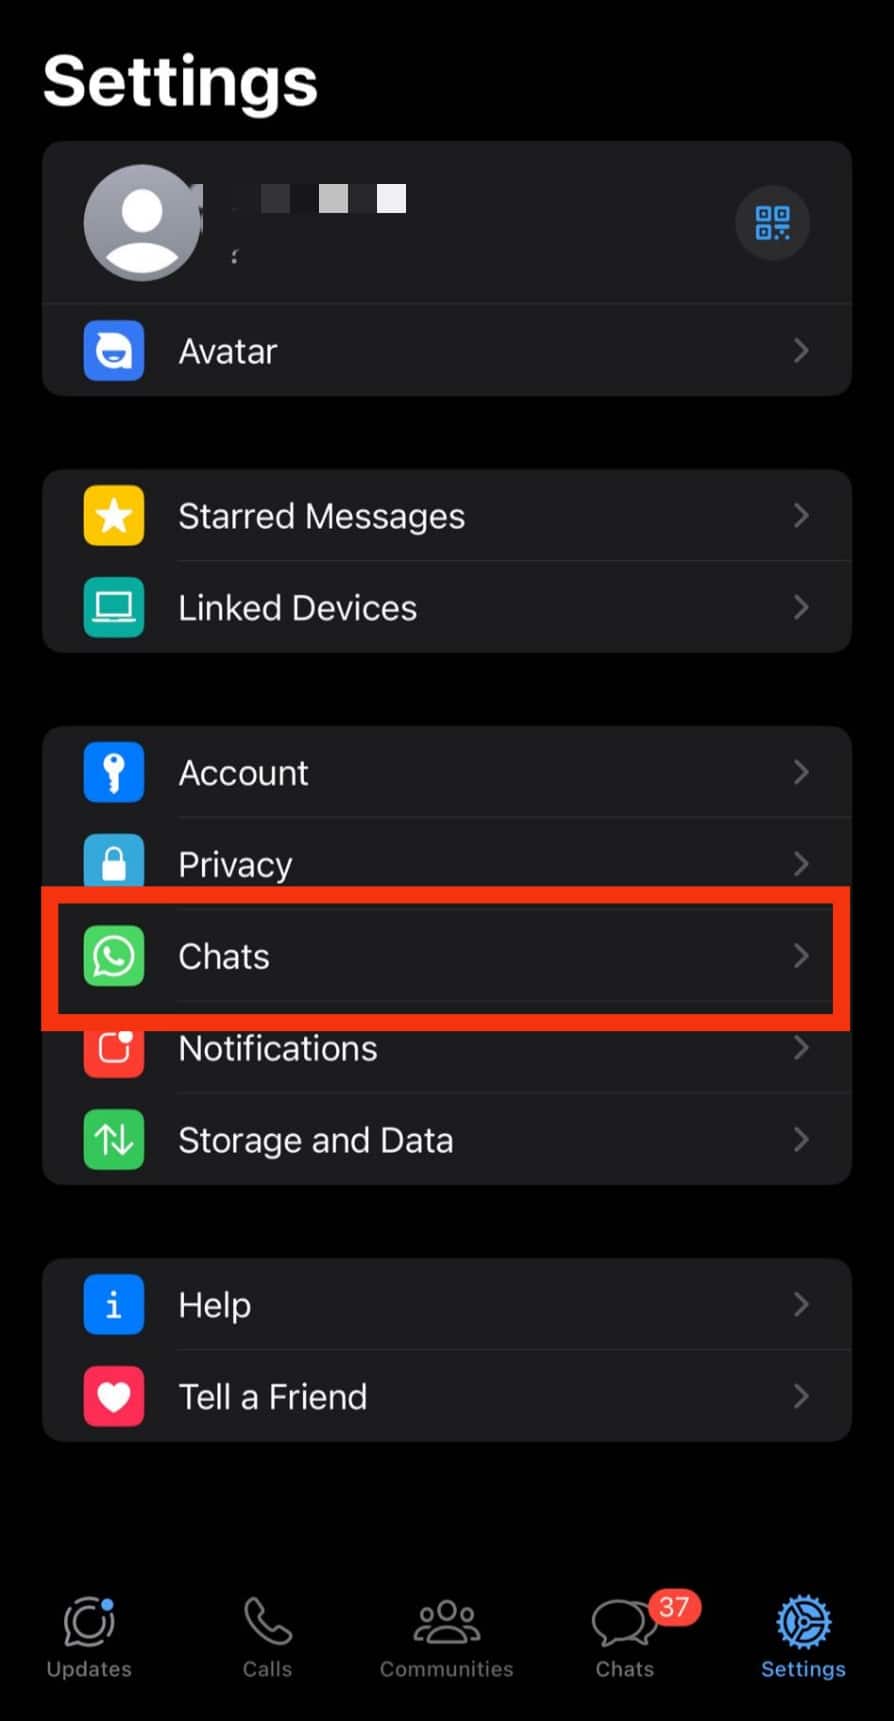 Tap The Chats Option.